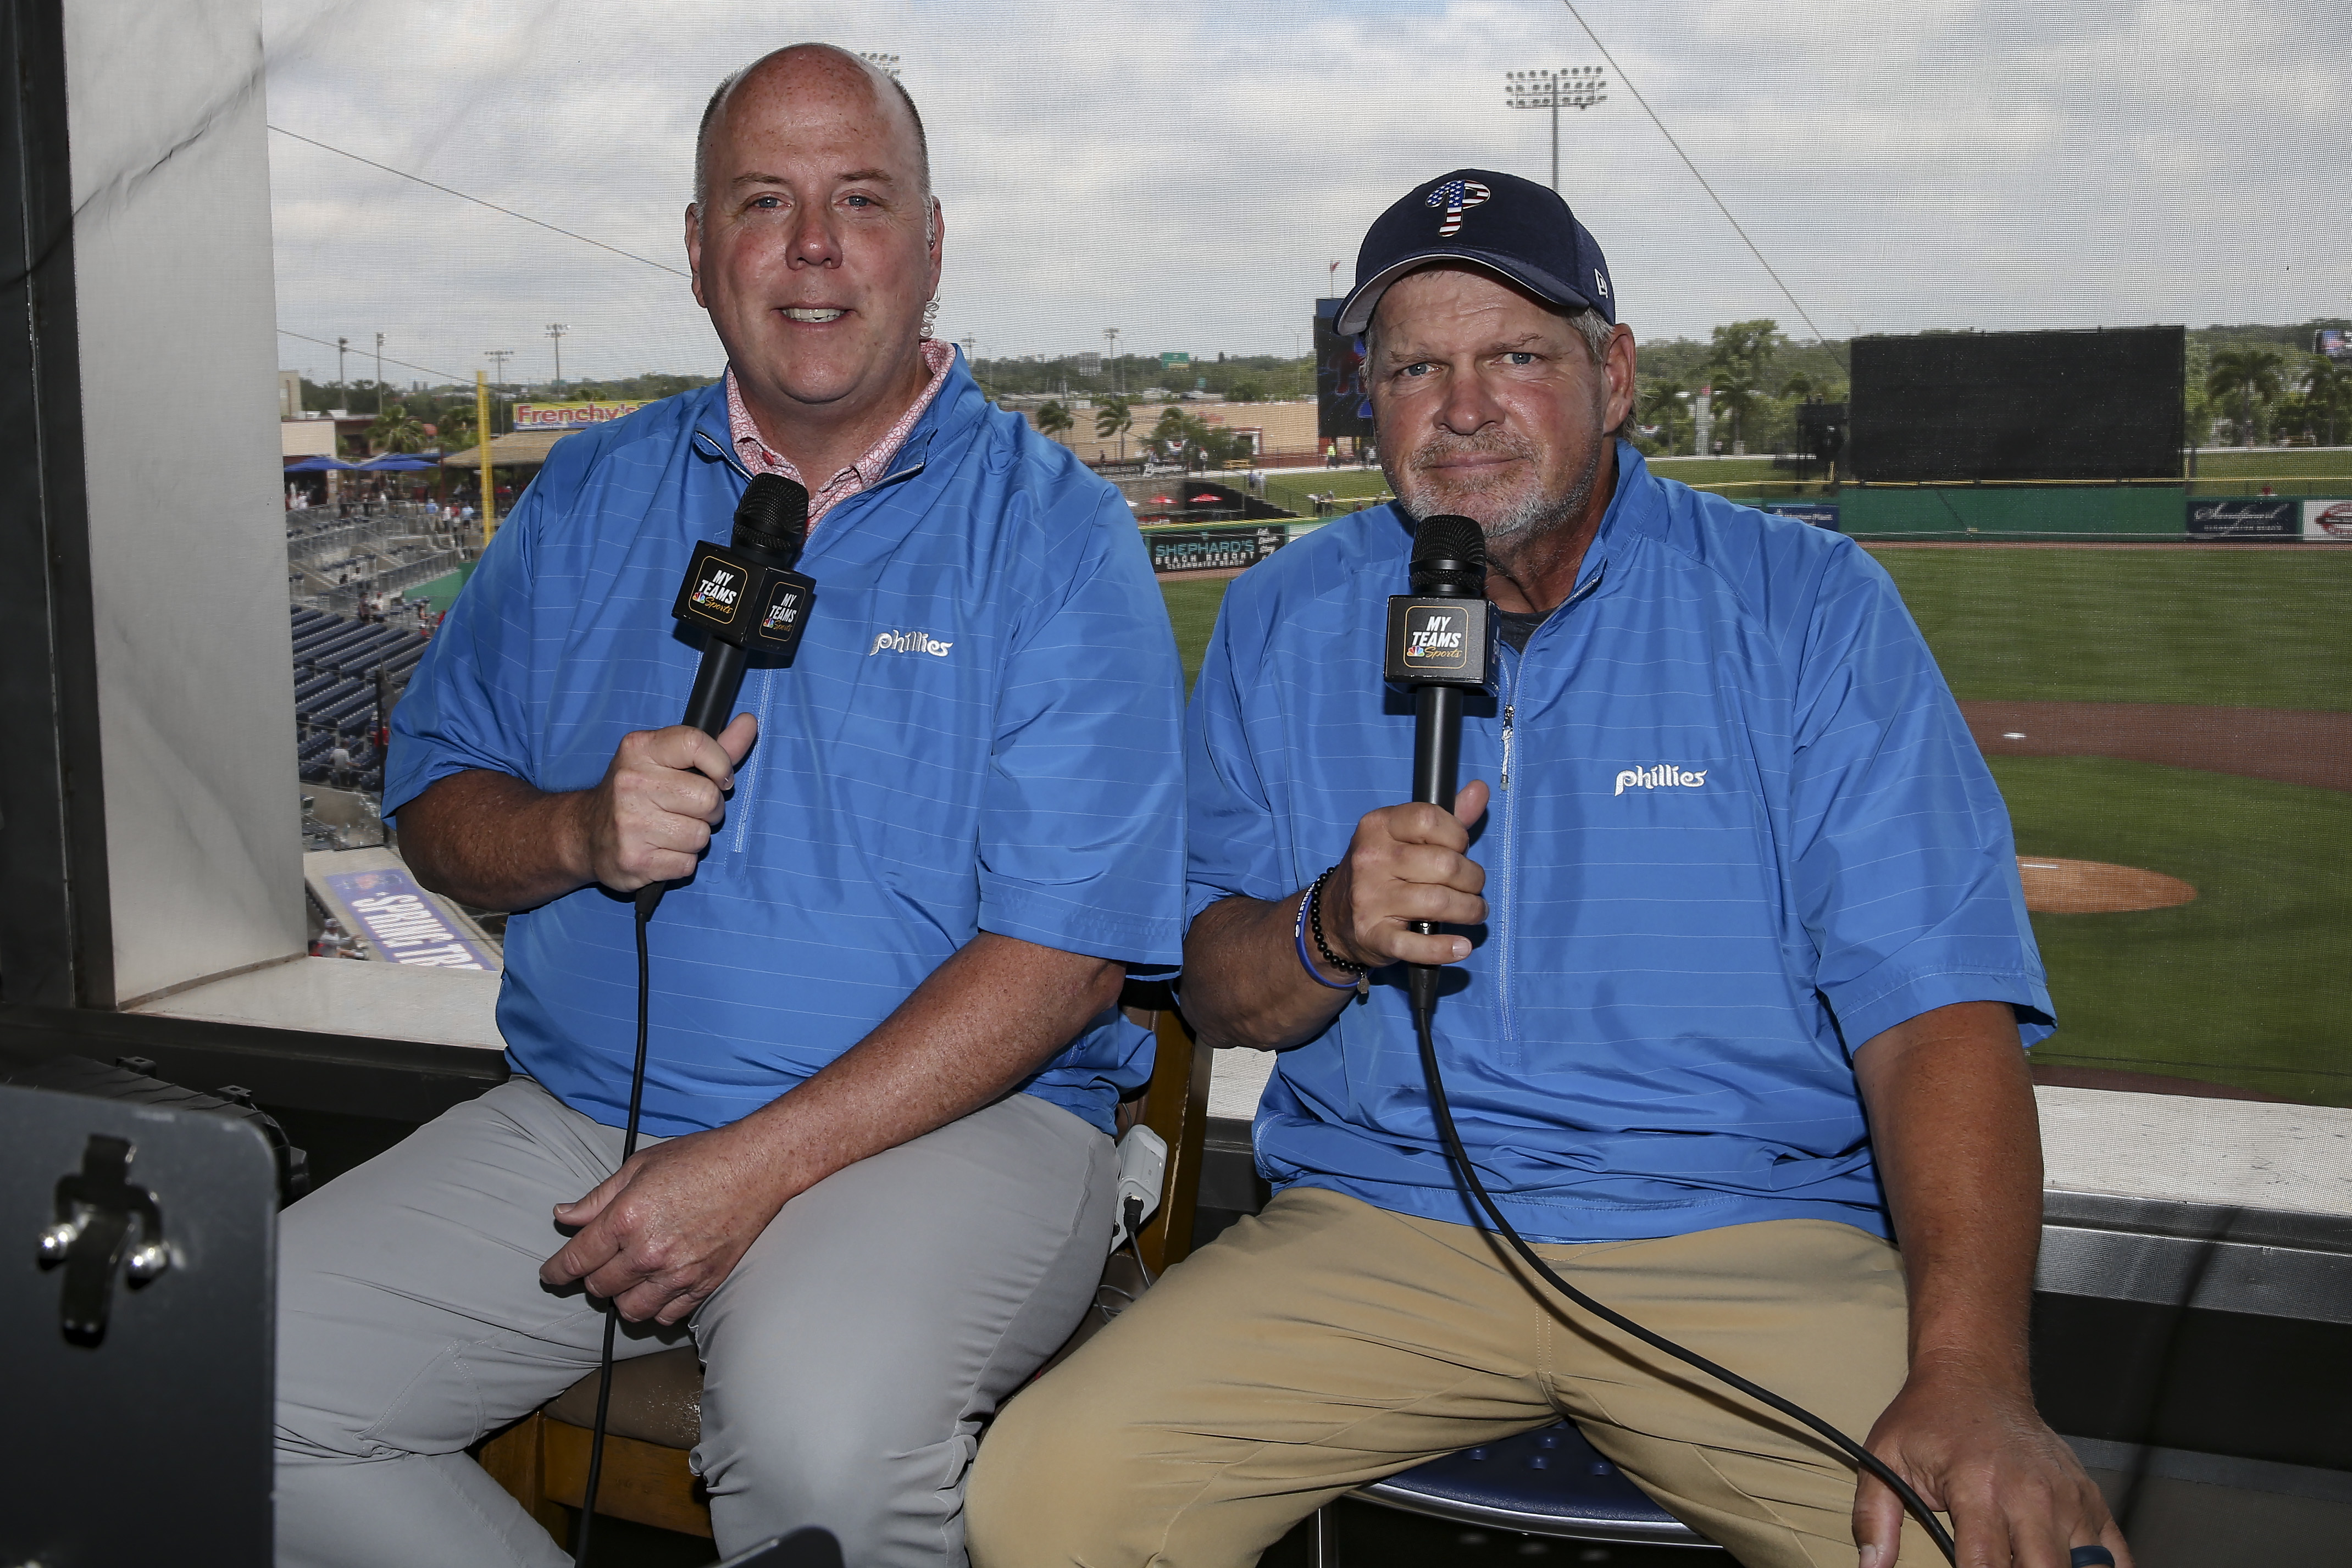 Phillies announcer John Kruk out of the booth, to have surgery